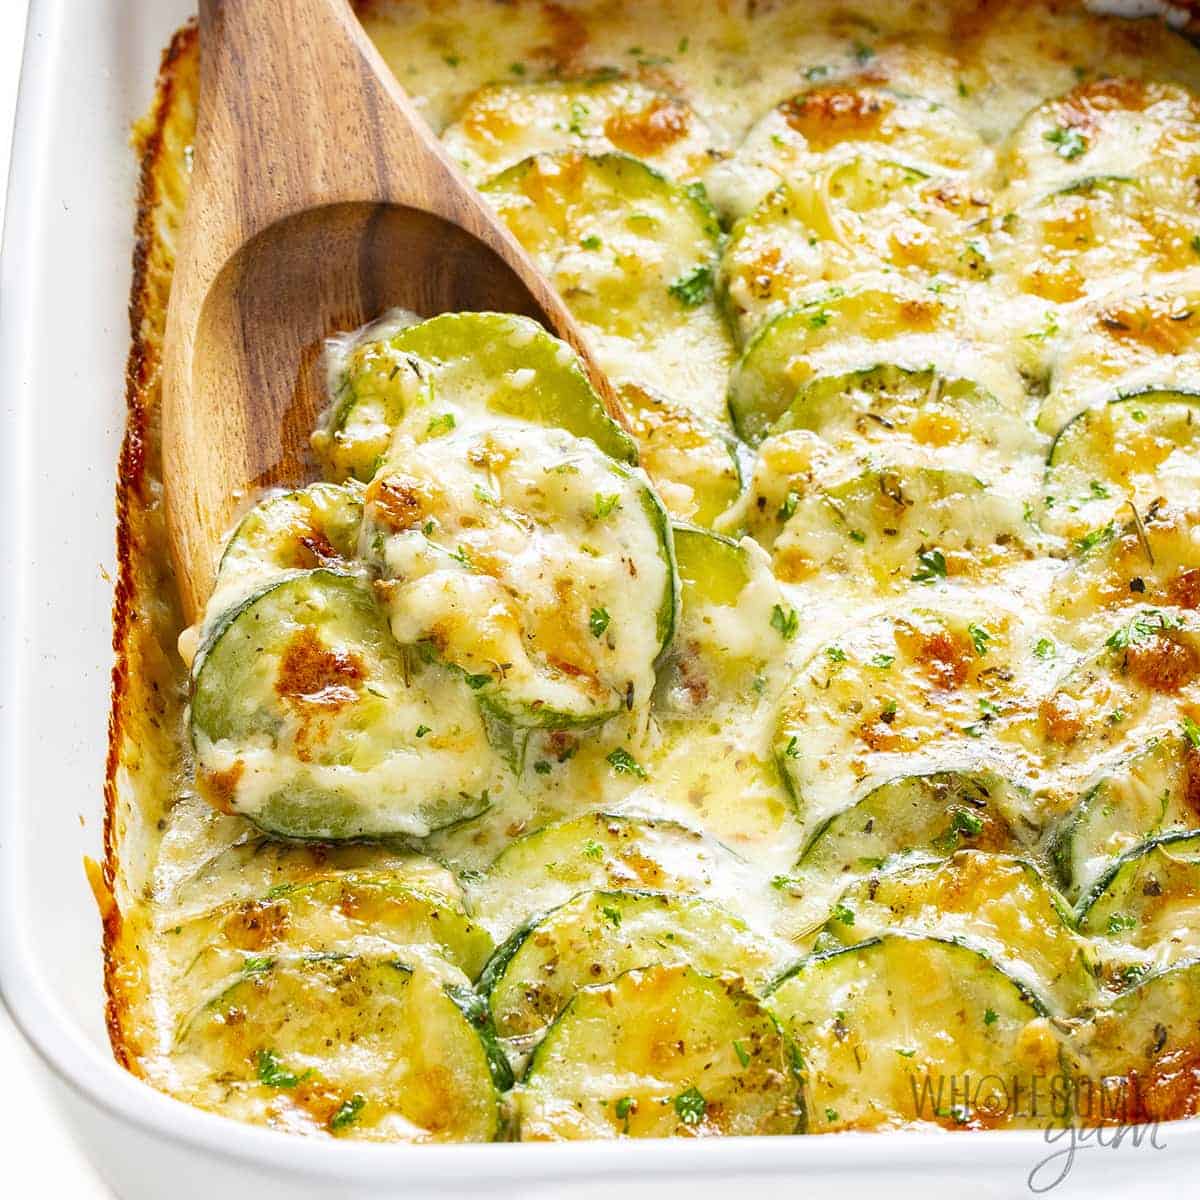 Cheesy Zucchini Casserole Recipe: Tips, Variations, and Serving Ideas